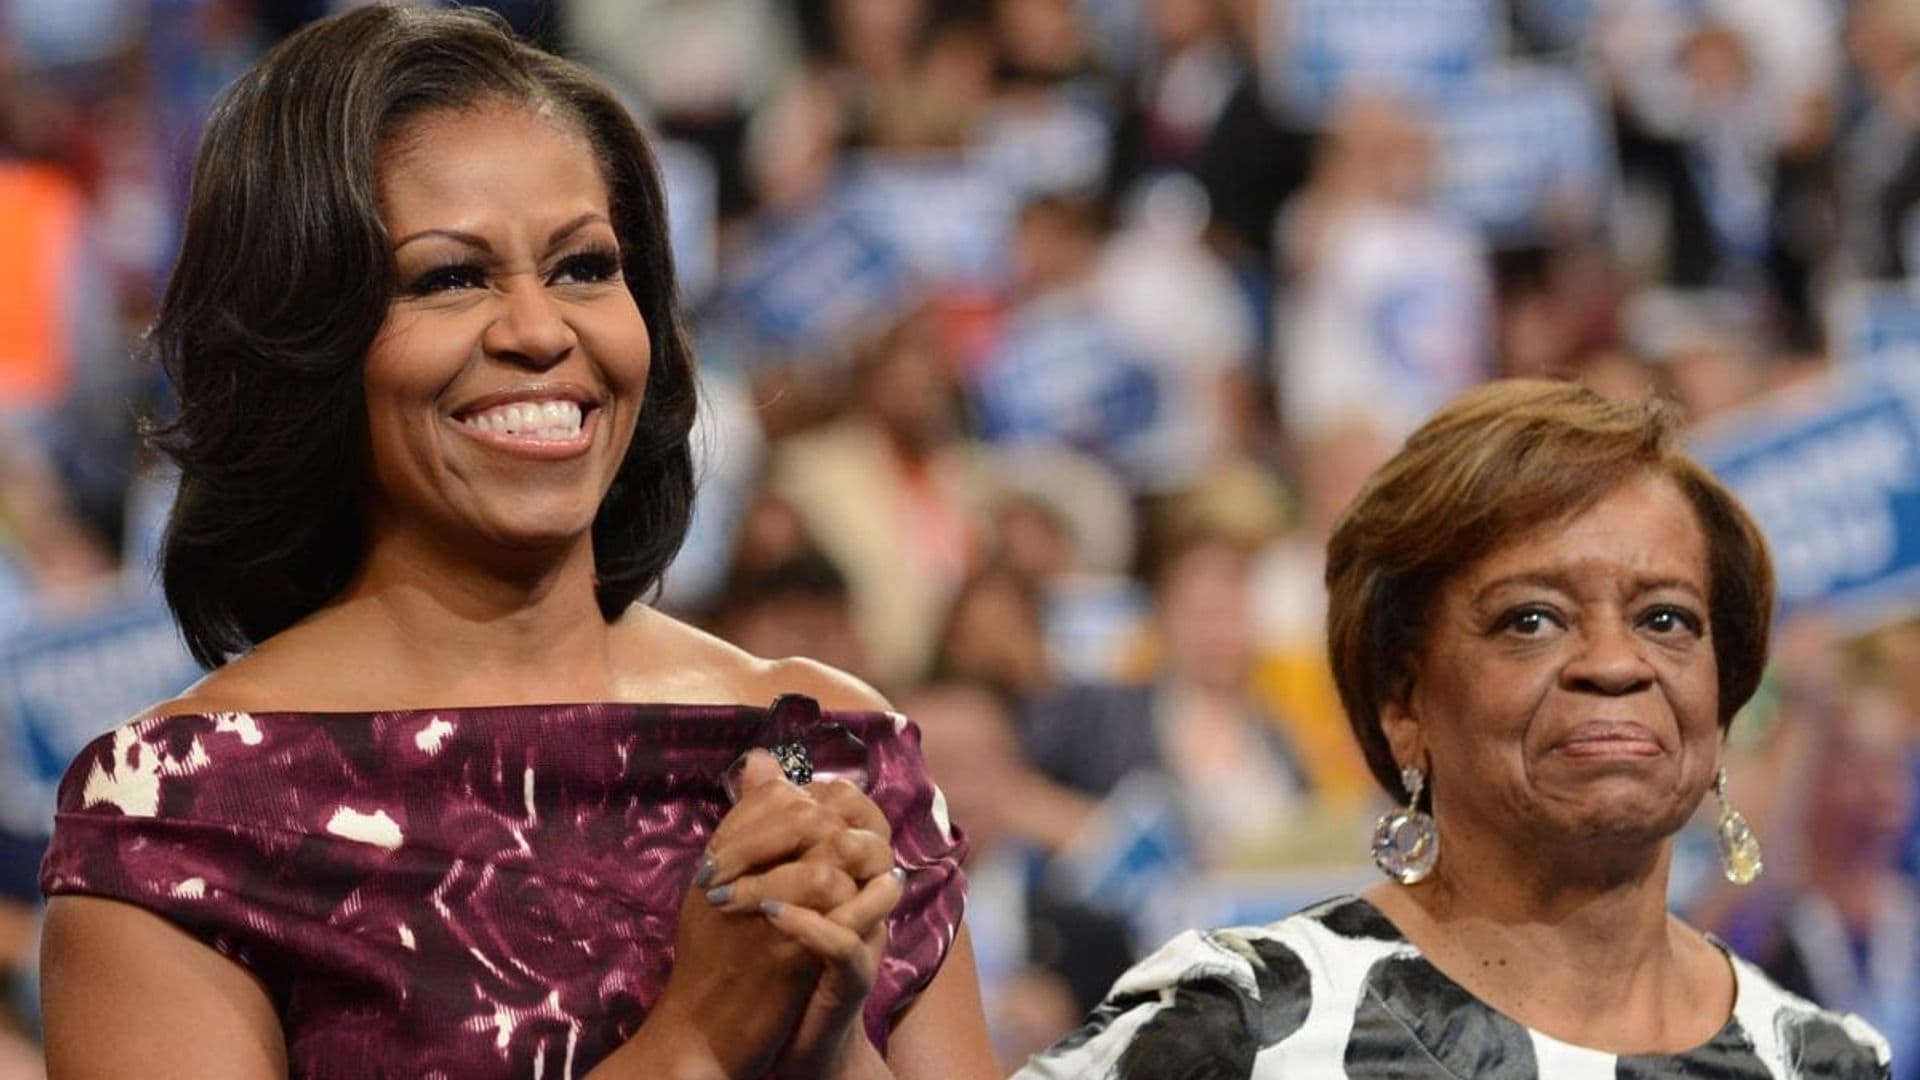 Michelle Obama’s mom Marian Robinson passes away at the age of 86